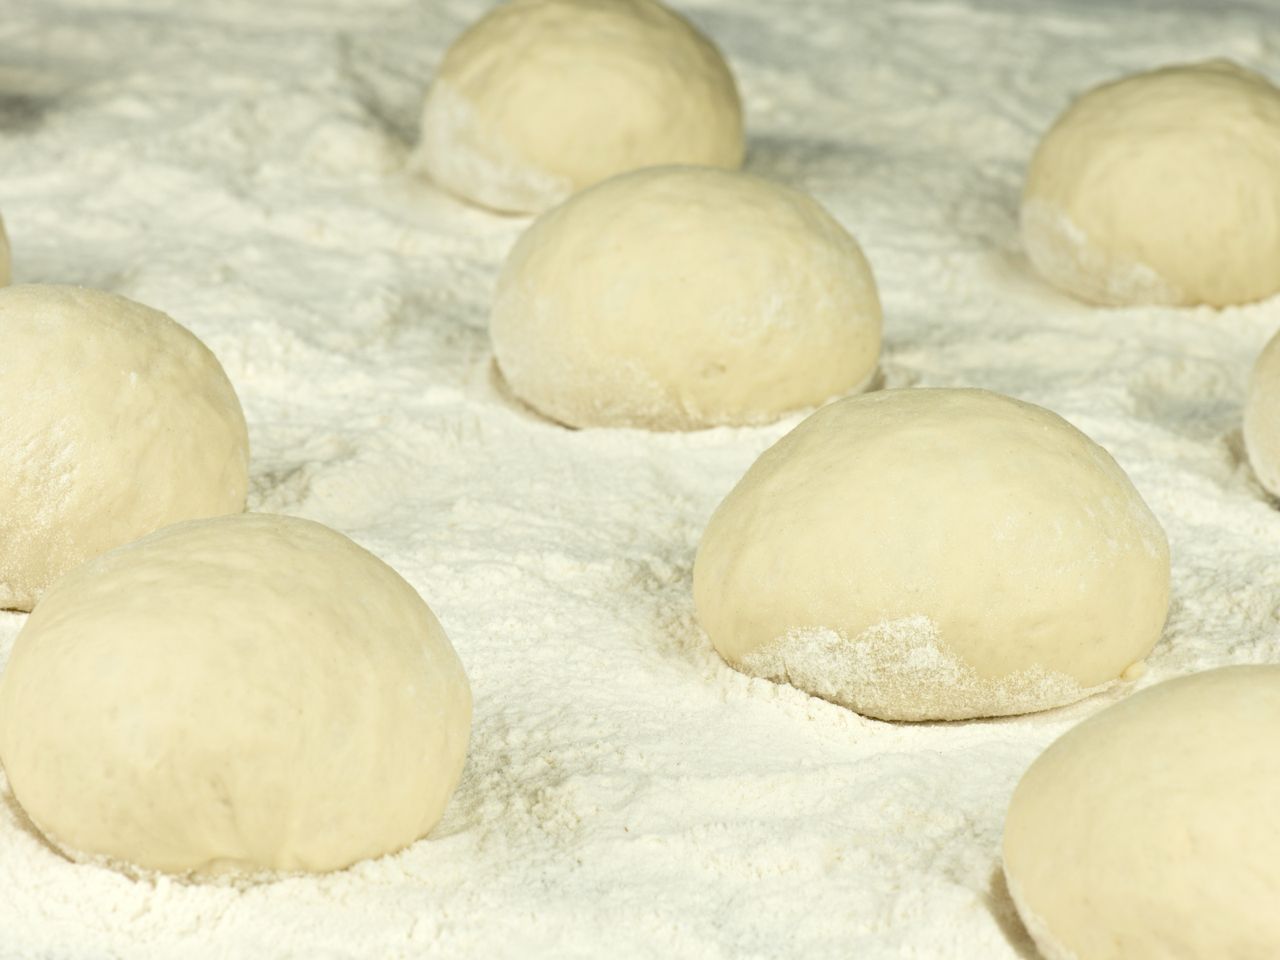 Reviving grandma's kitchen trick for perfect yeast dough: You just need a fork